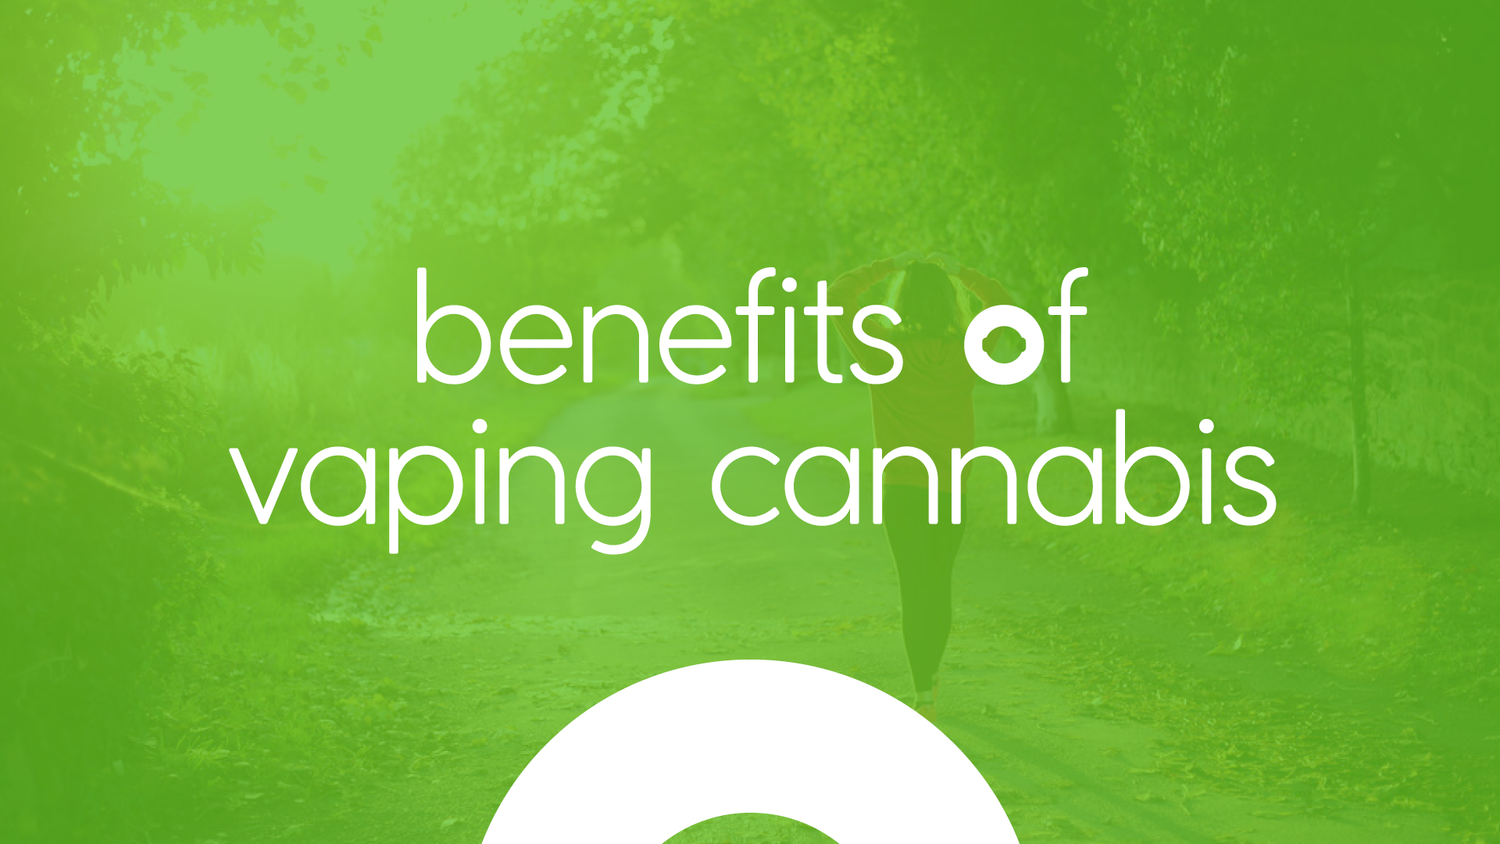 Benefits of Vaping Cannabis graphic